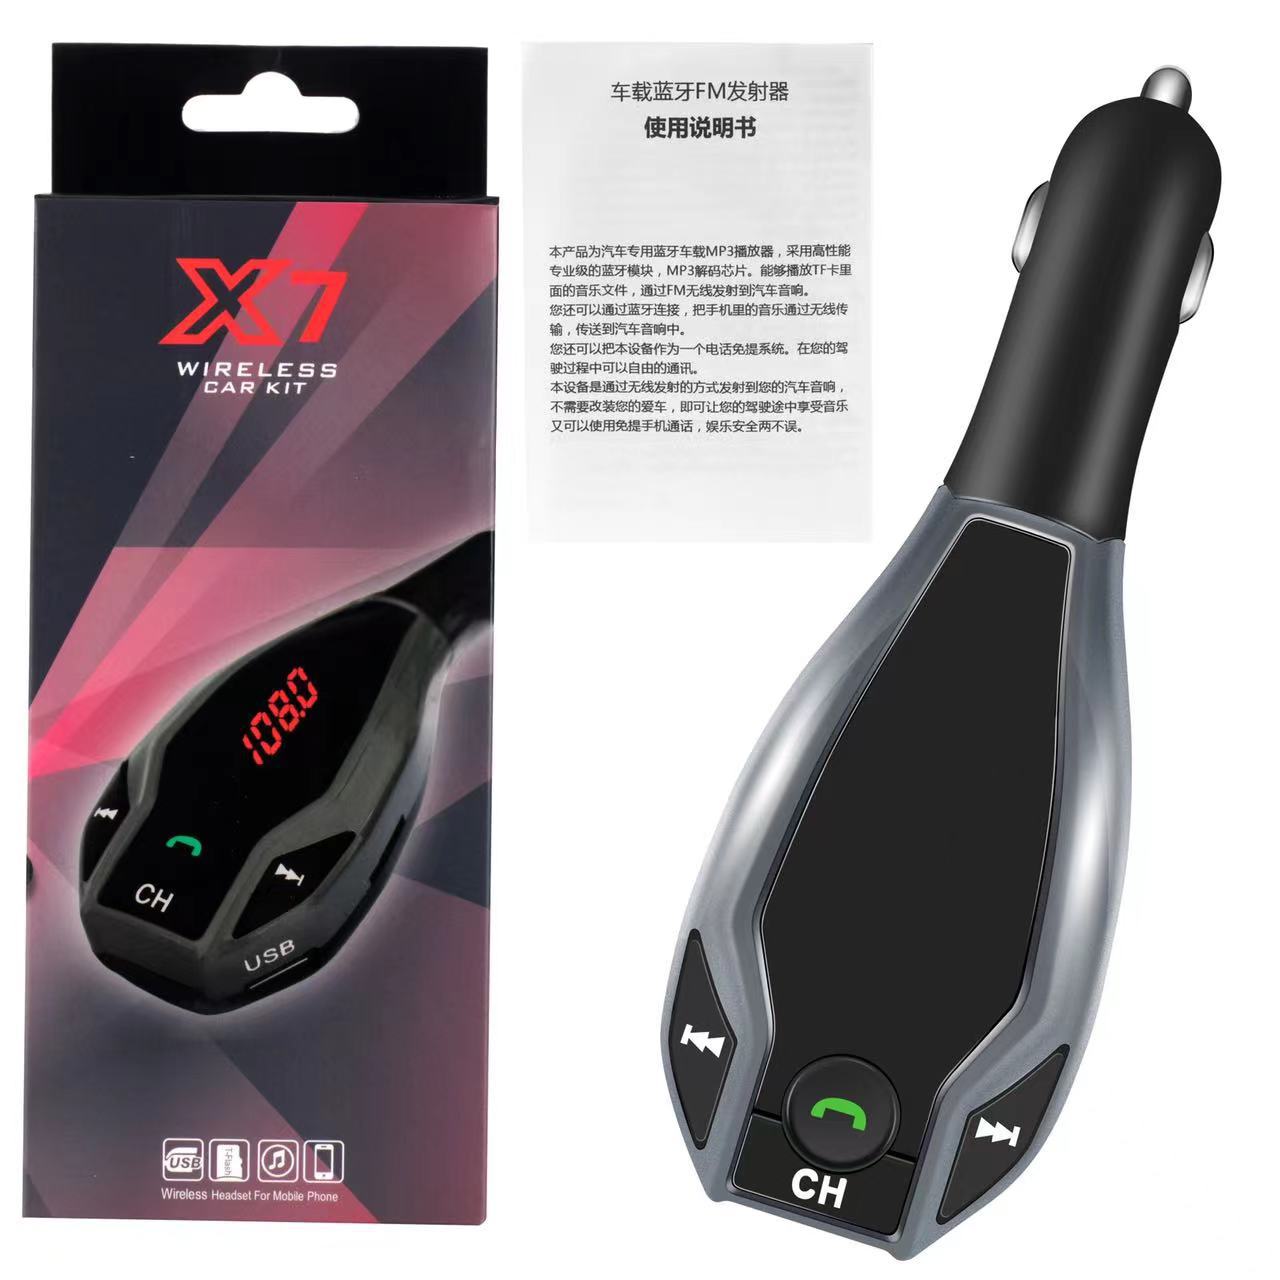 Factory Spot X7 Car Mps3 Double USB Car Charger Car Vehicular Bluetooth MP3 Player FM Transmitter